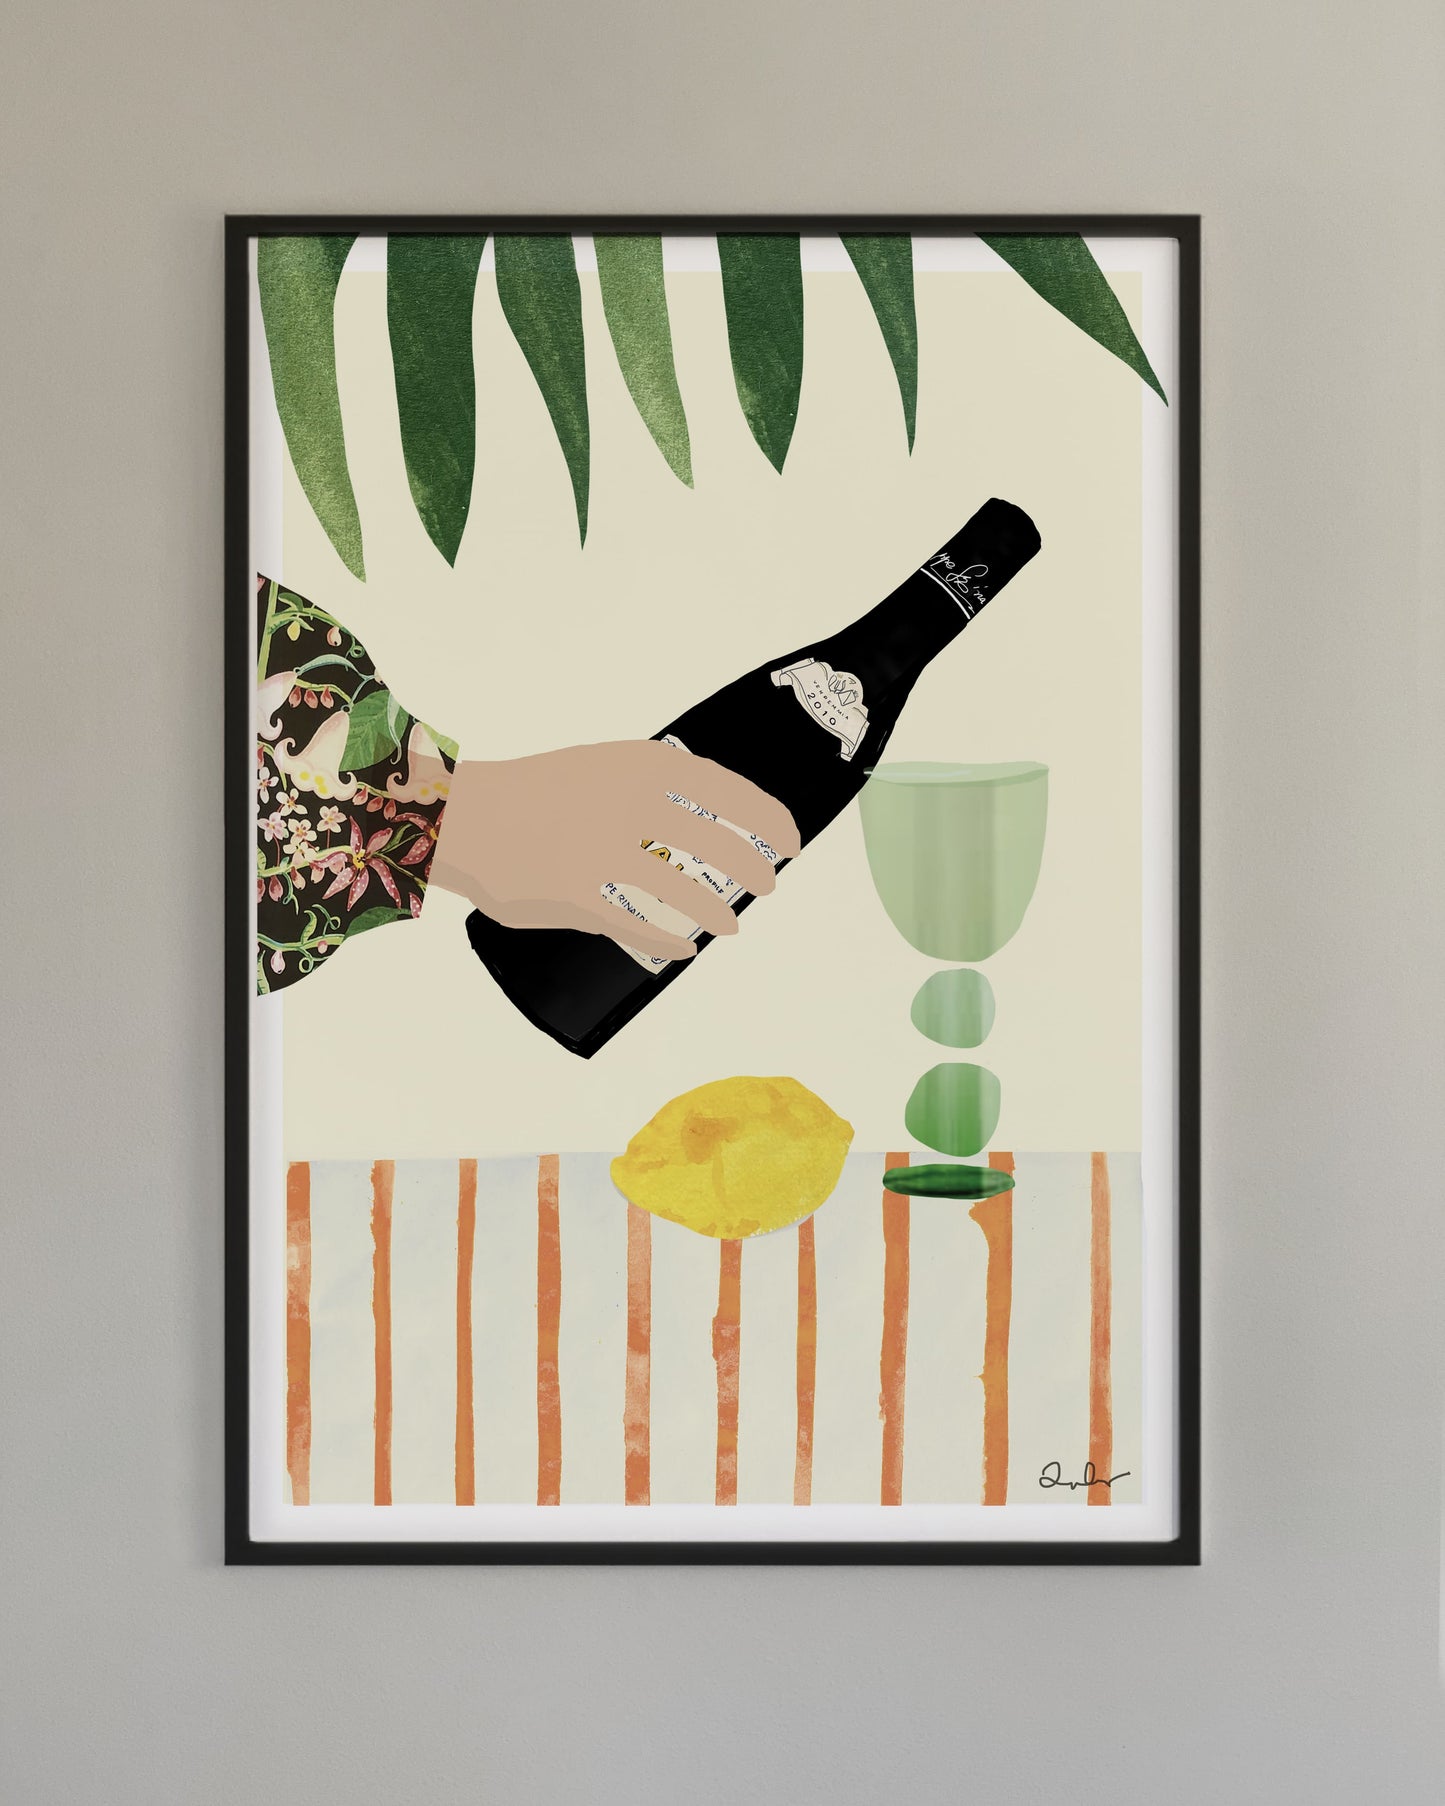 Wine poster. Wine art. Exclusive wine art posters. Premium quality wine art poster. Printed on environmentally friendly FSC marked paper. 